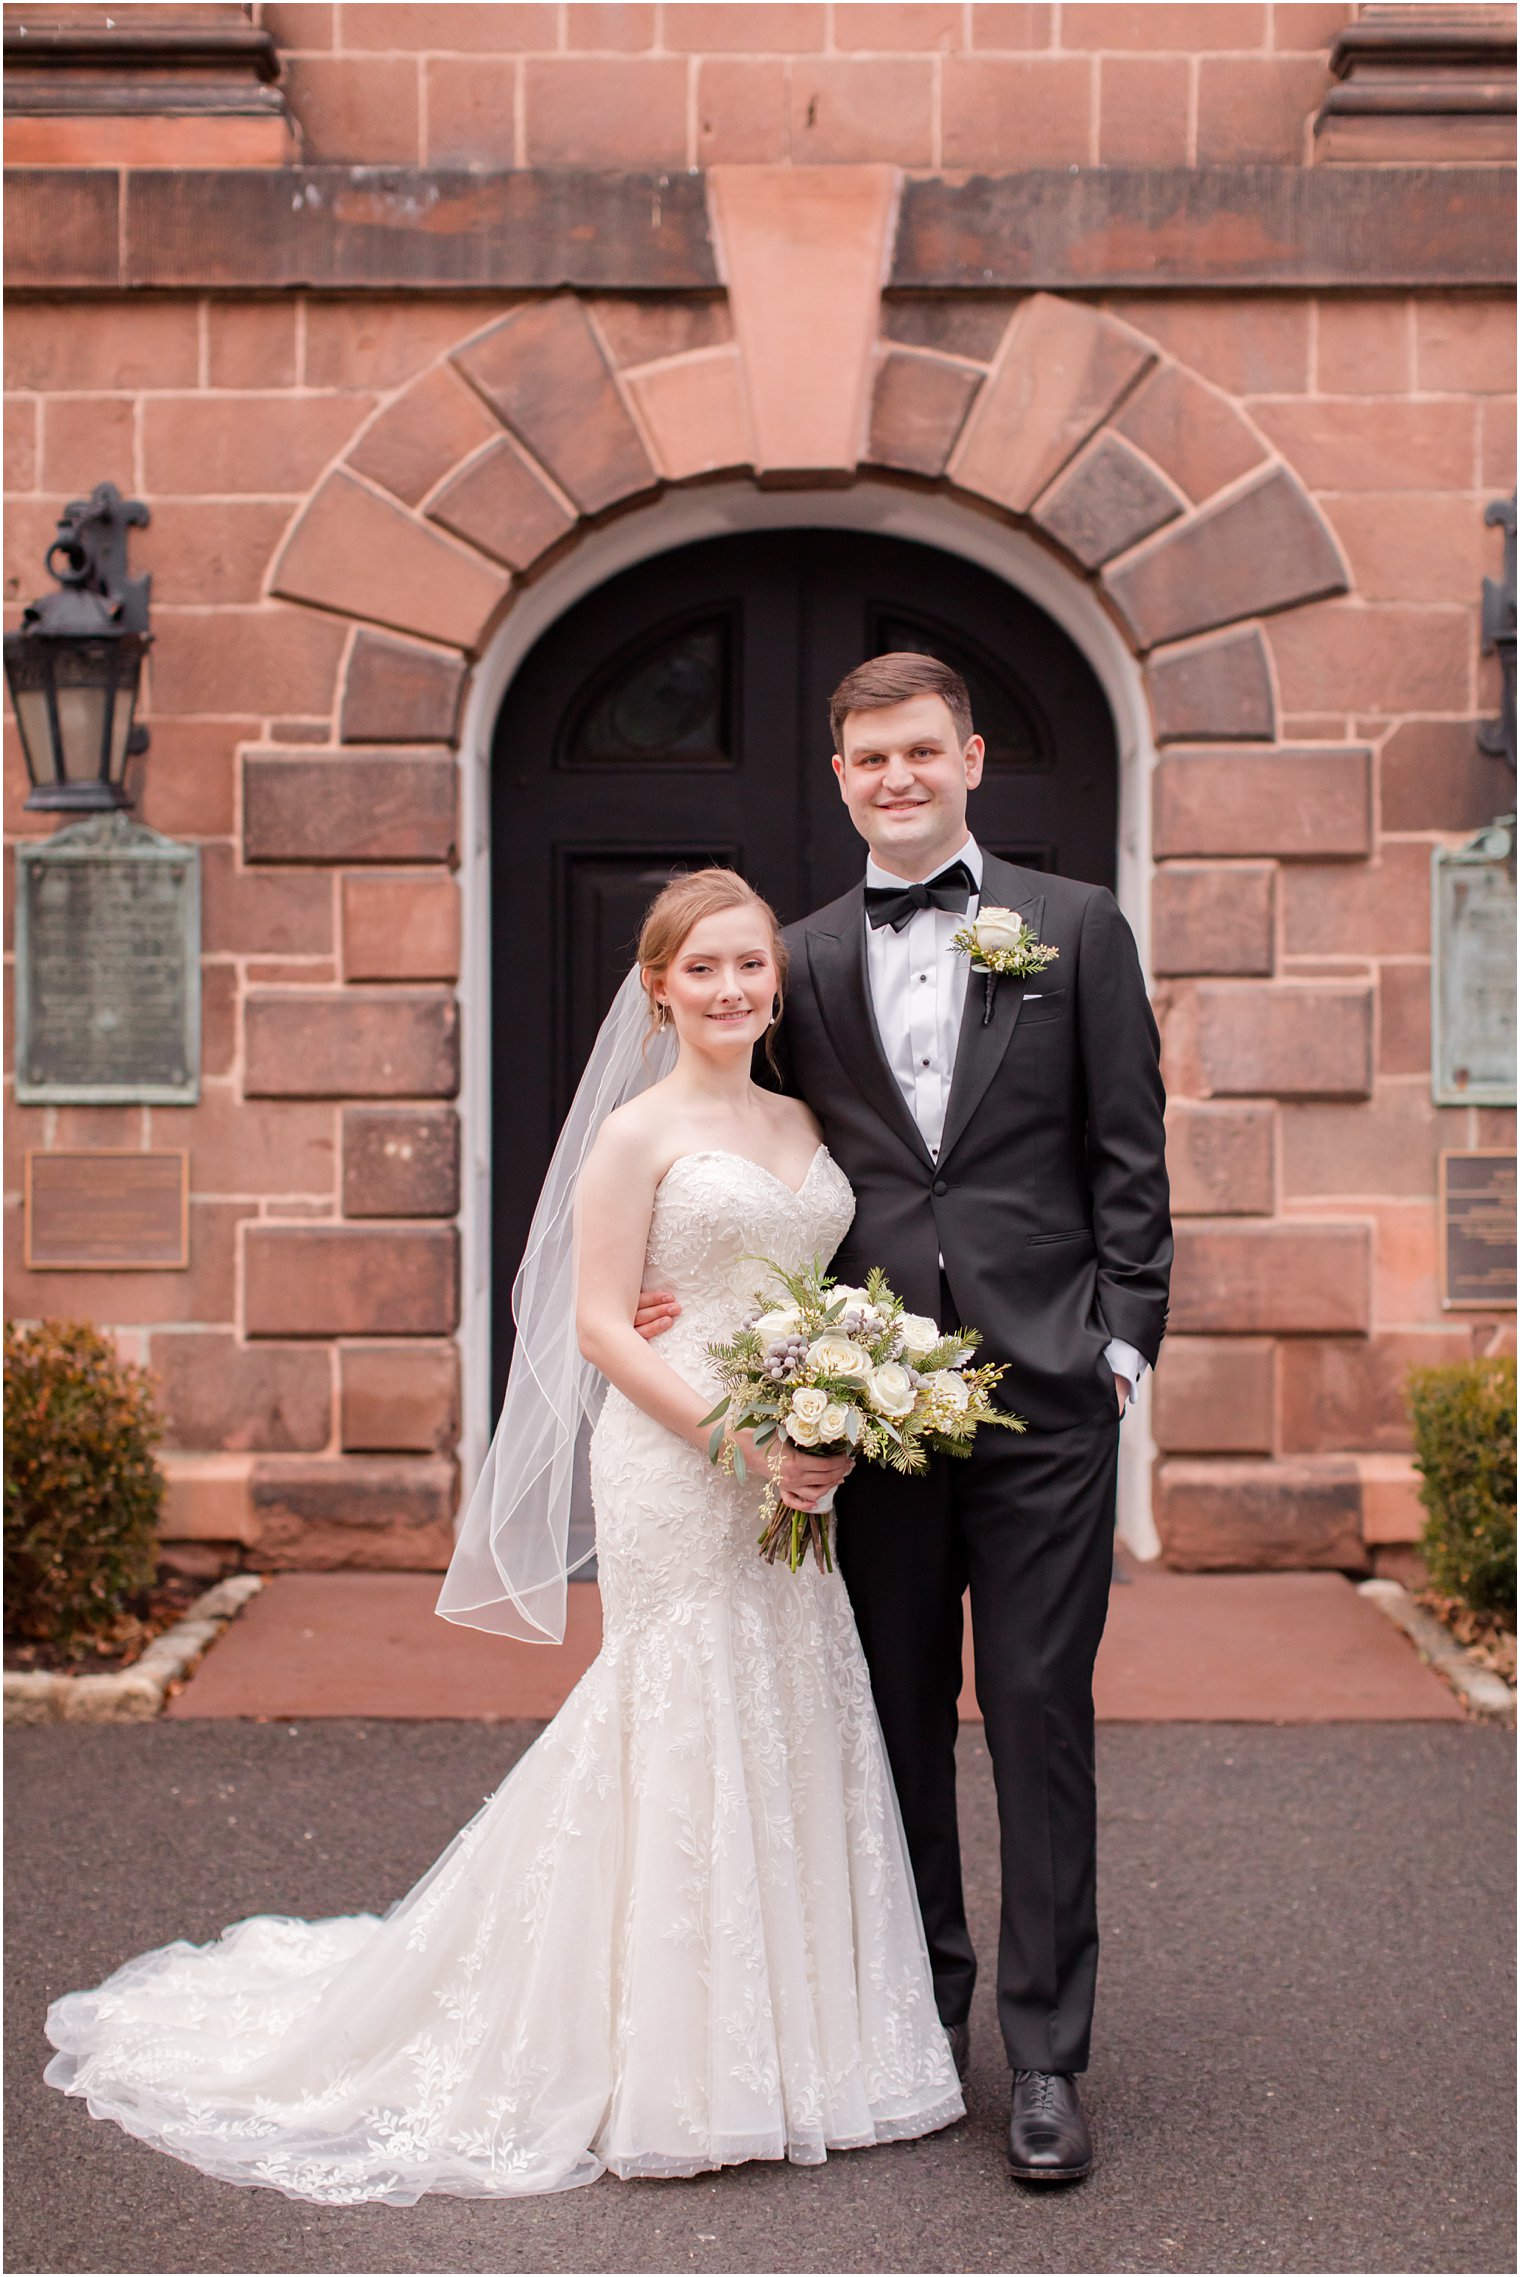 Bride and groom at Old Queens on Rutgers Campus in New Brunswick, NJ